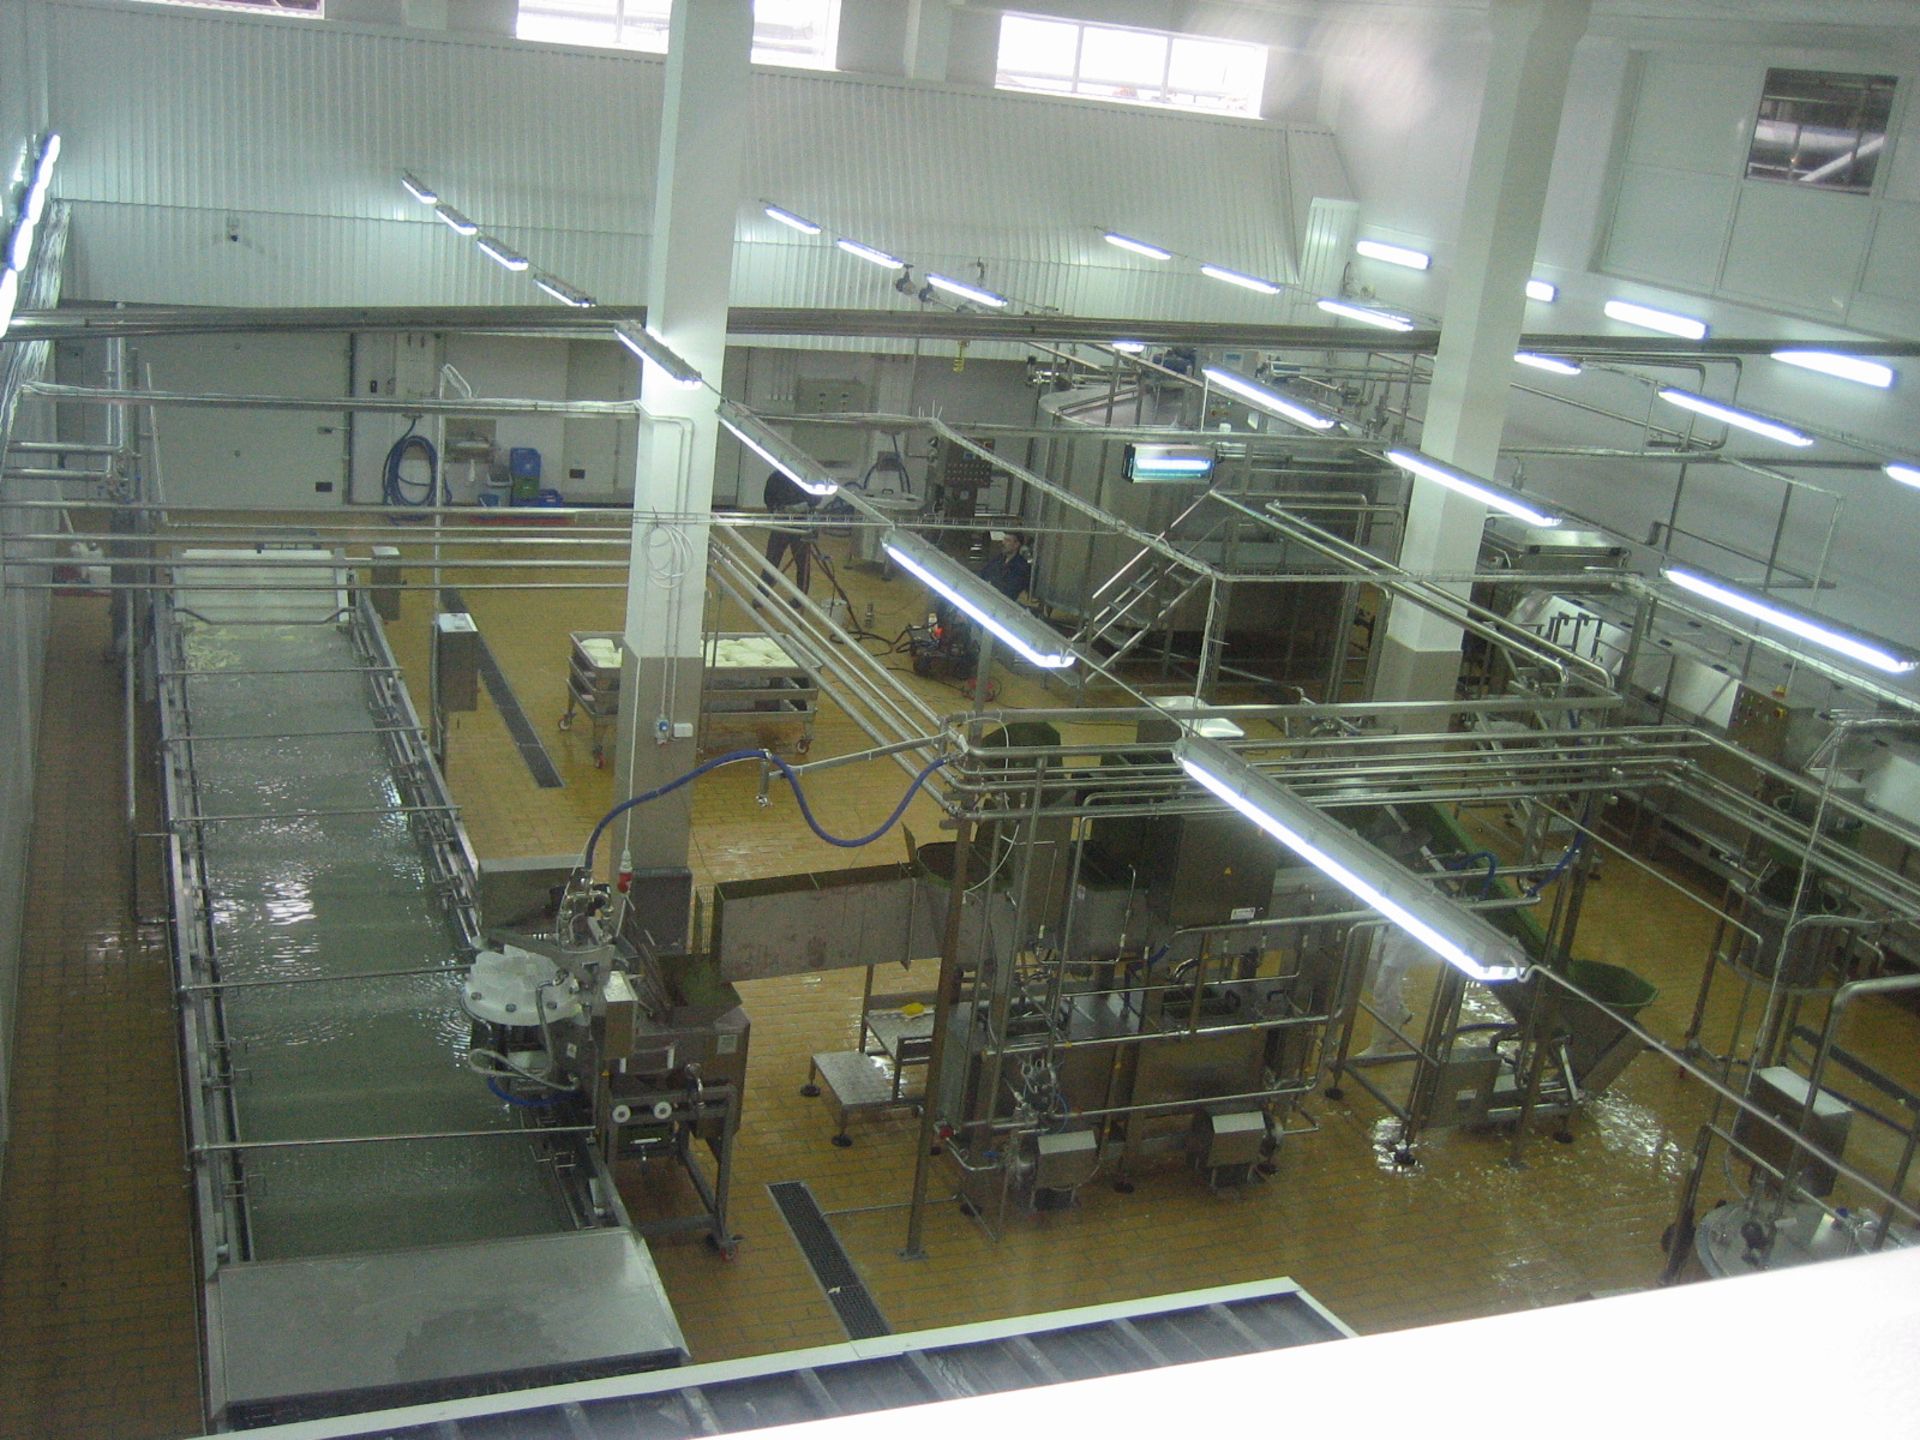 2X COMAT PROCESSING LINES FOR MOZZARELLA CHEESE TO PRODUCE MOZZARELLA STICKS AND MOZZARELLA BLOCKS - Image 2 of 11